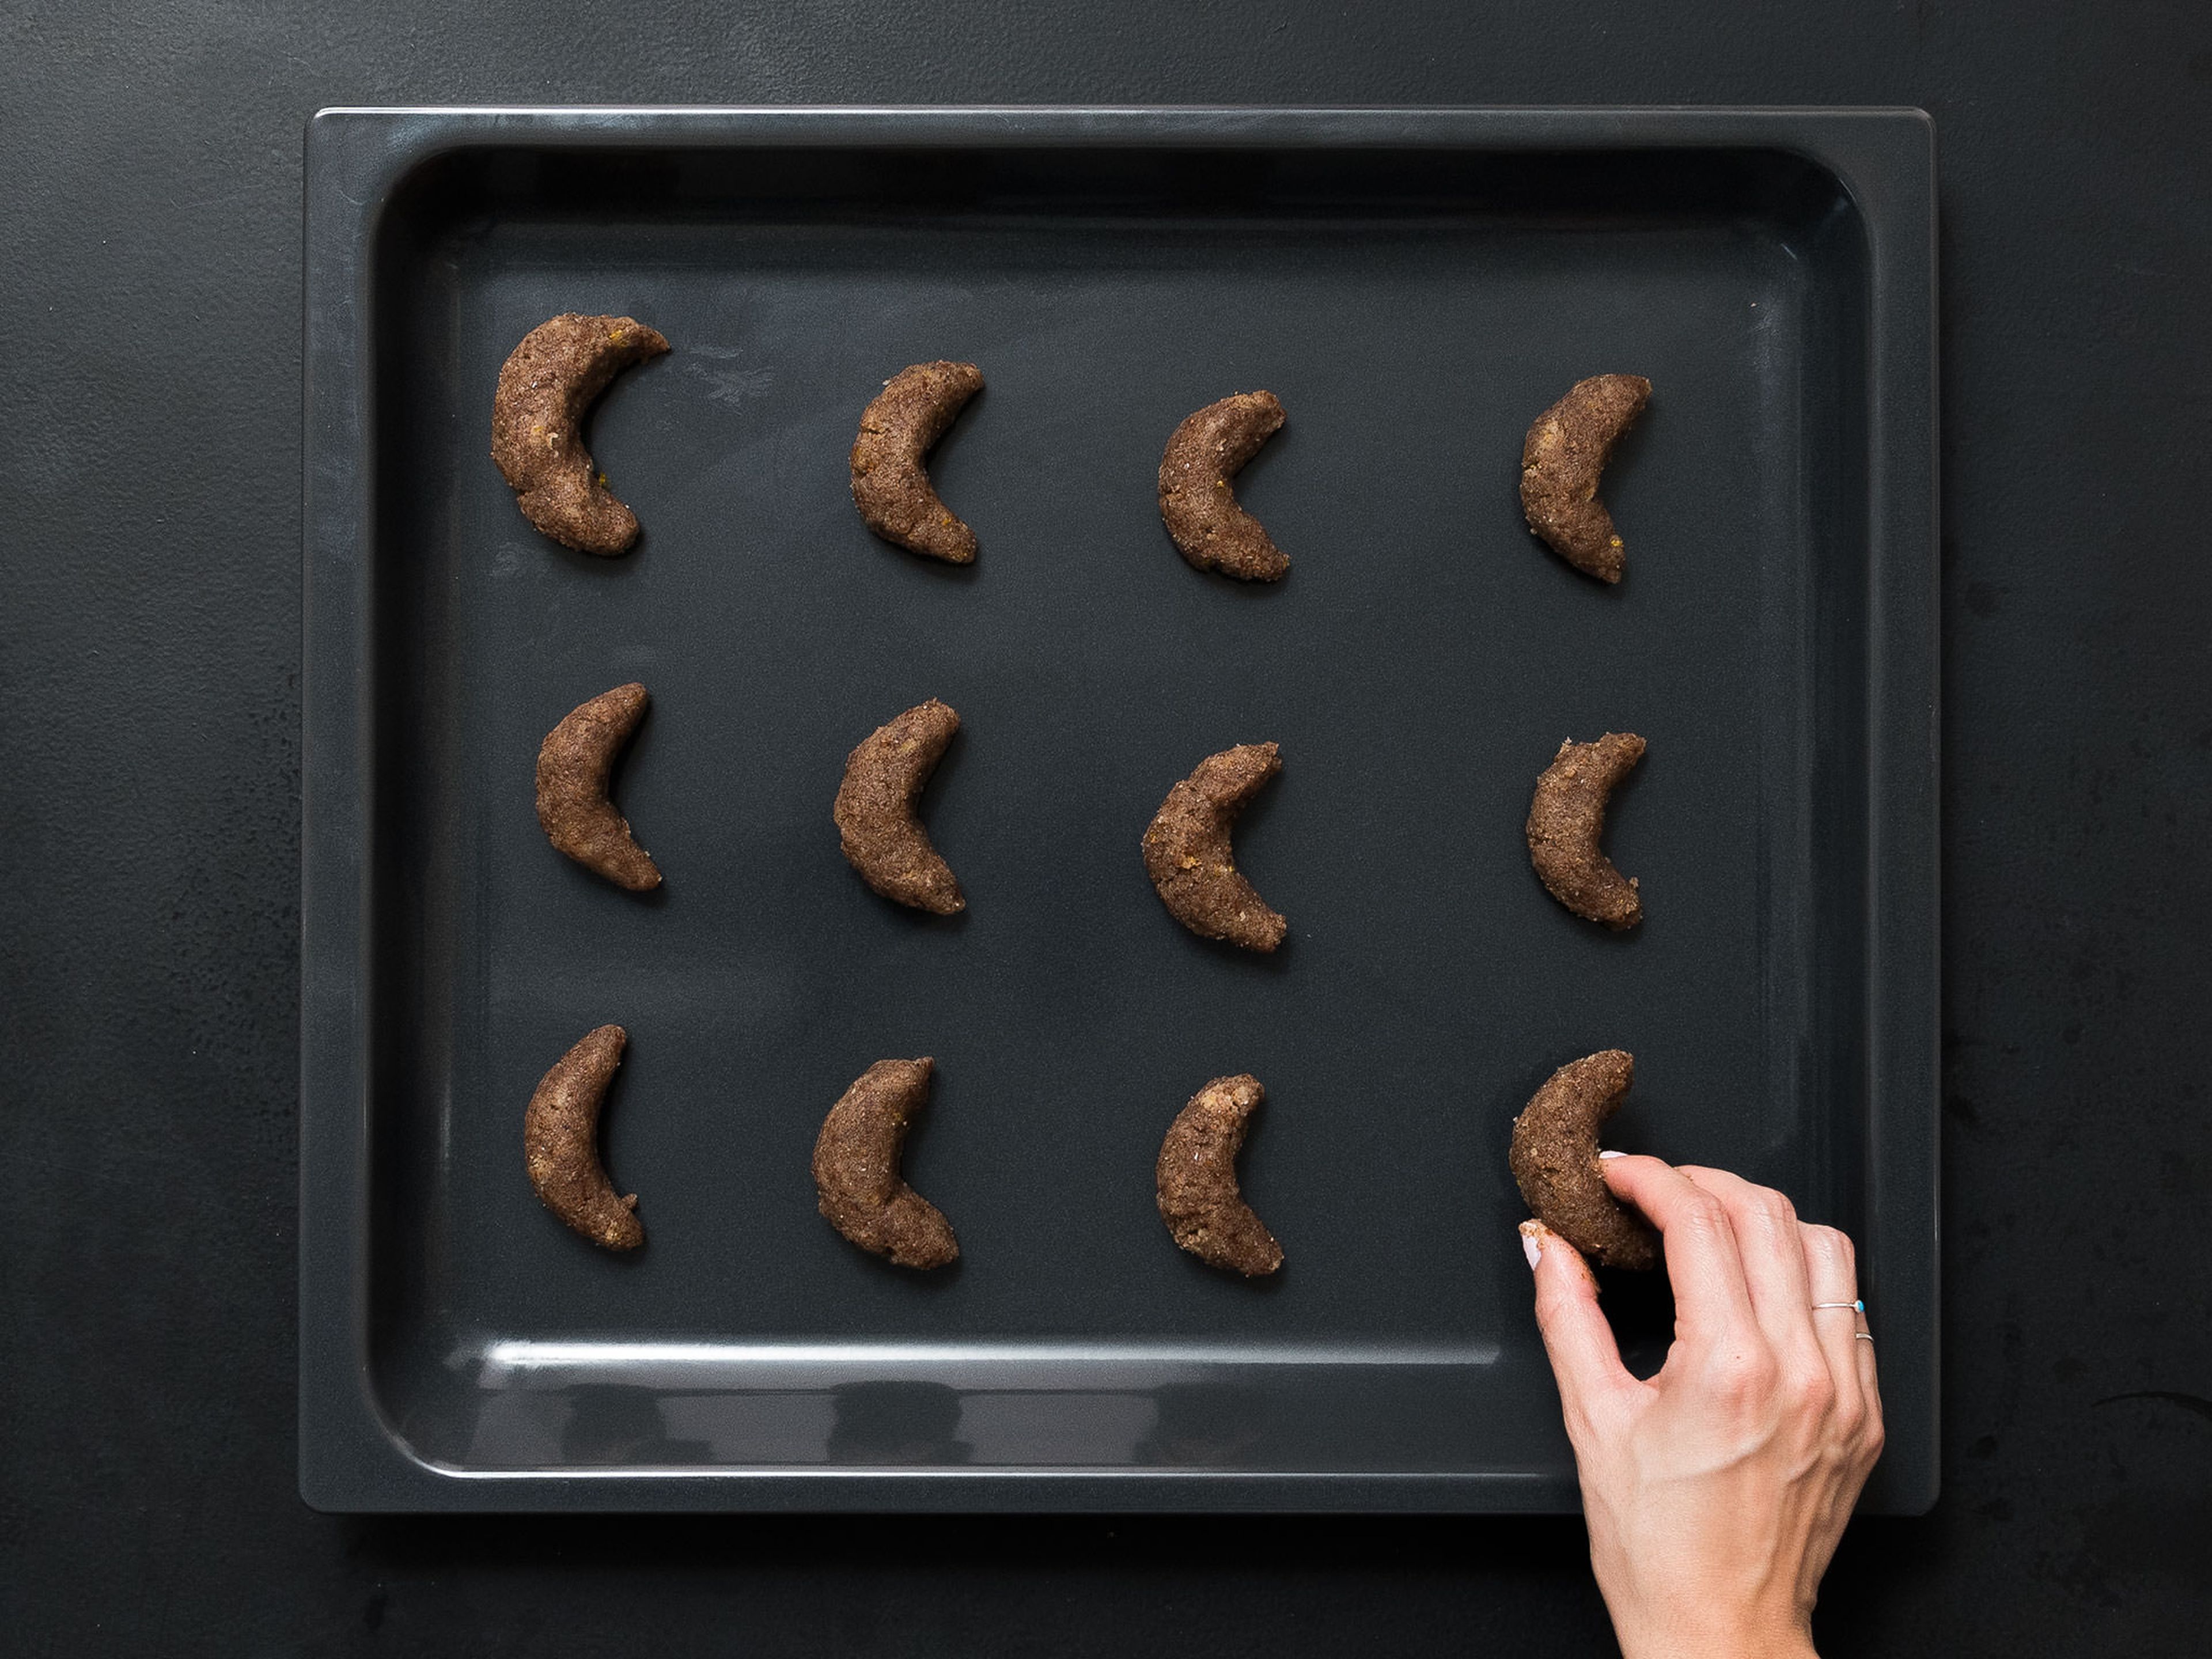 Pre-heat oven to 150°C/300°F. Remove dough from fridge and form into crescent shapes. Place on a baking sheet lined with parchment paper and bake in oven for approx. 15 - 20 min. before removing and setting aside to cool on a wire rack.